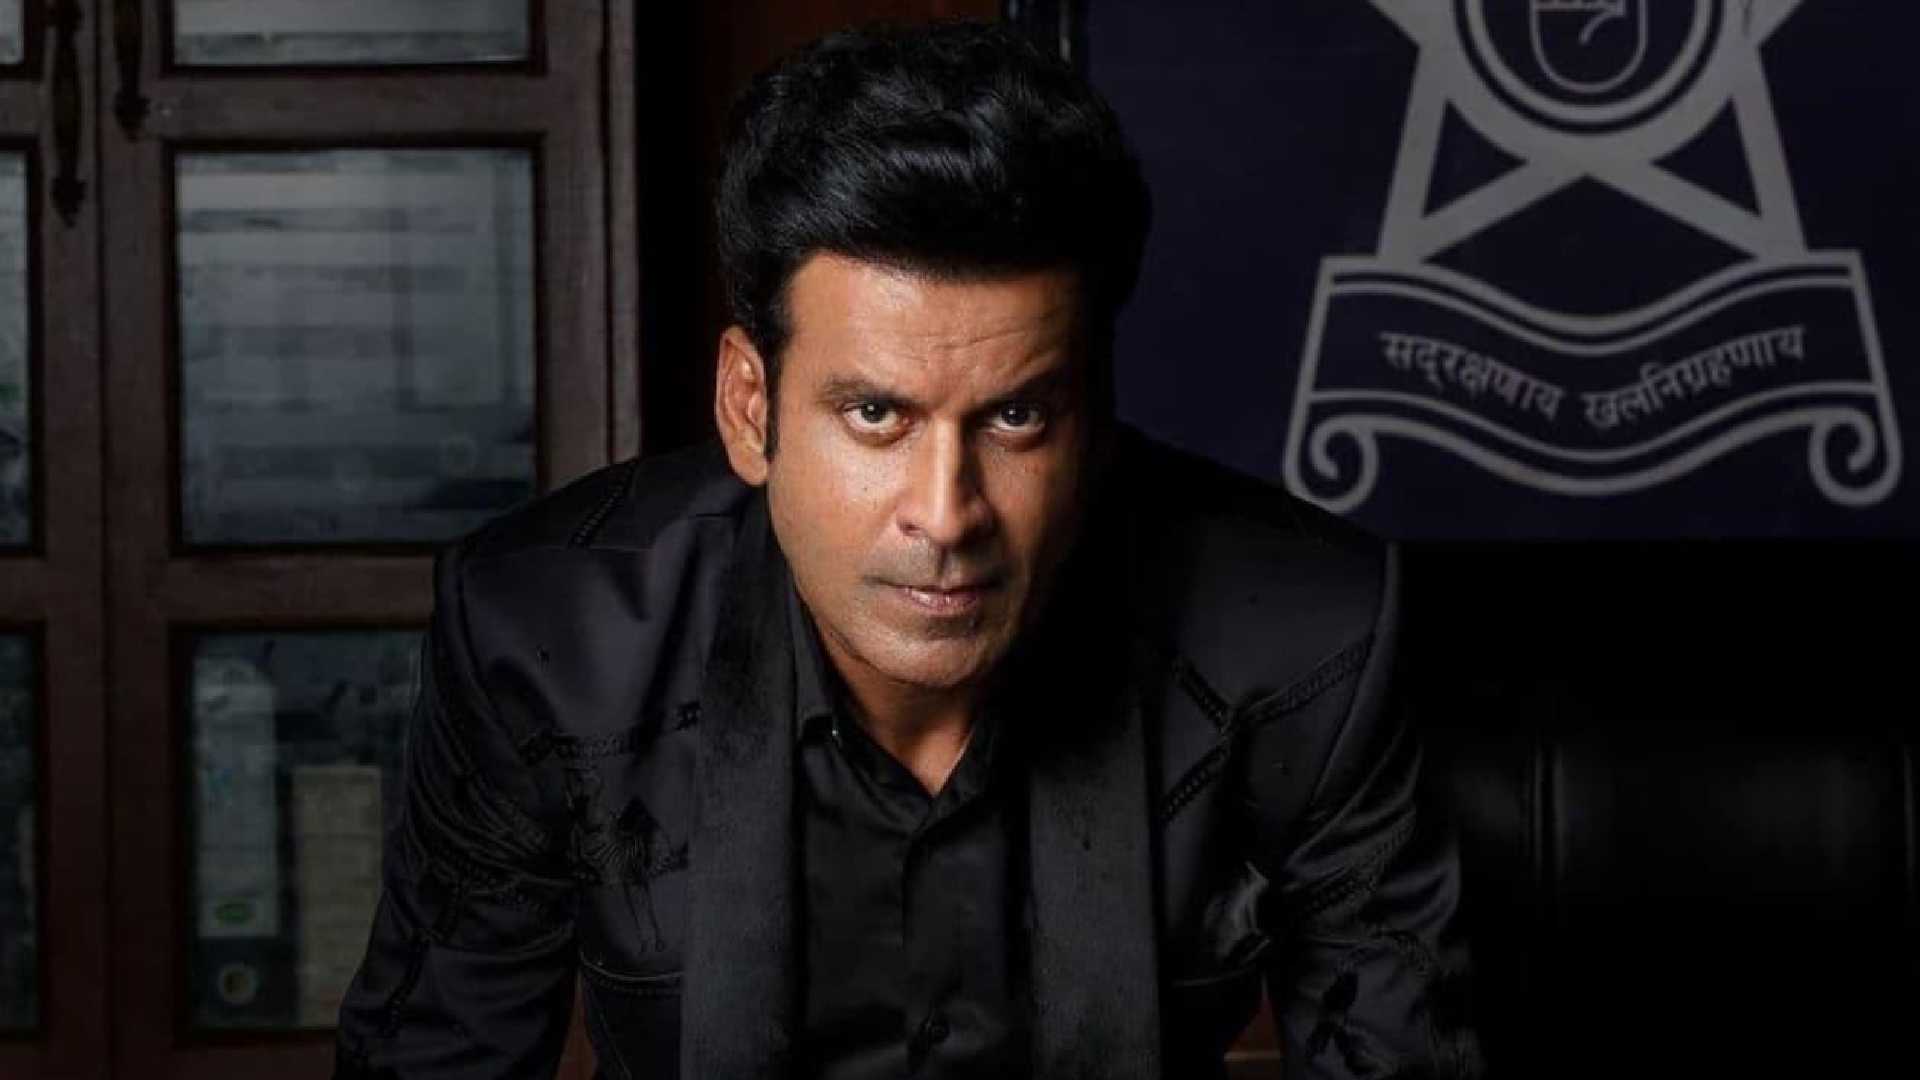 Manoj Bajpayee's 'The Fable' to premiere at Berlin International Film Festival